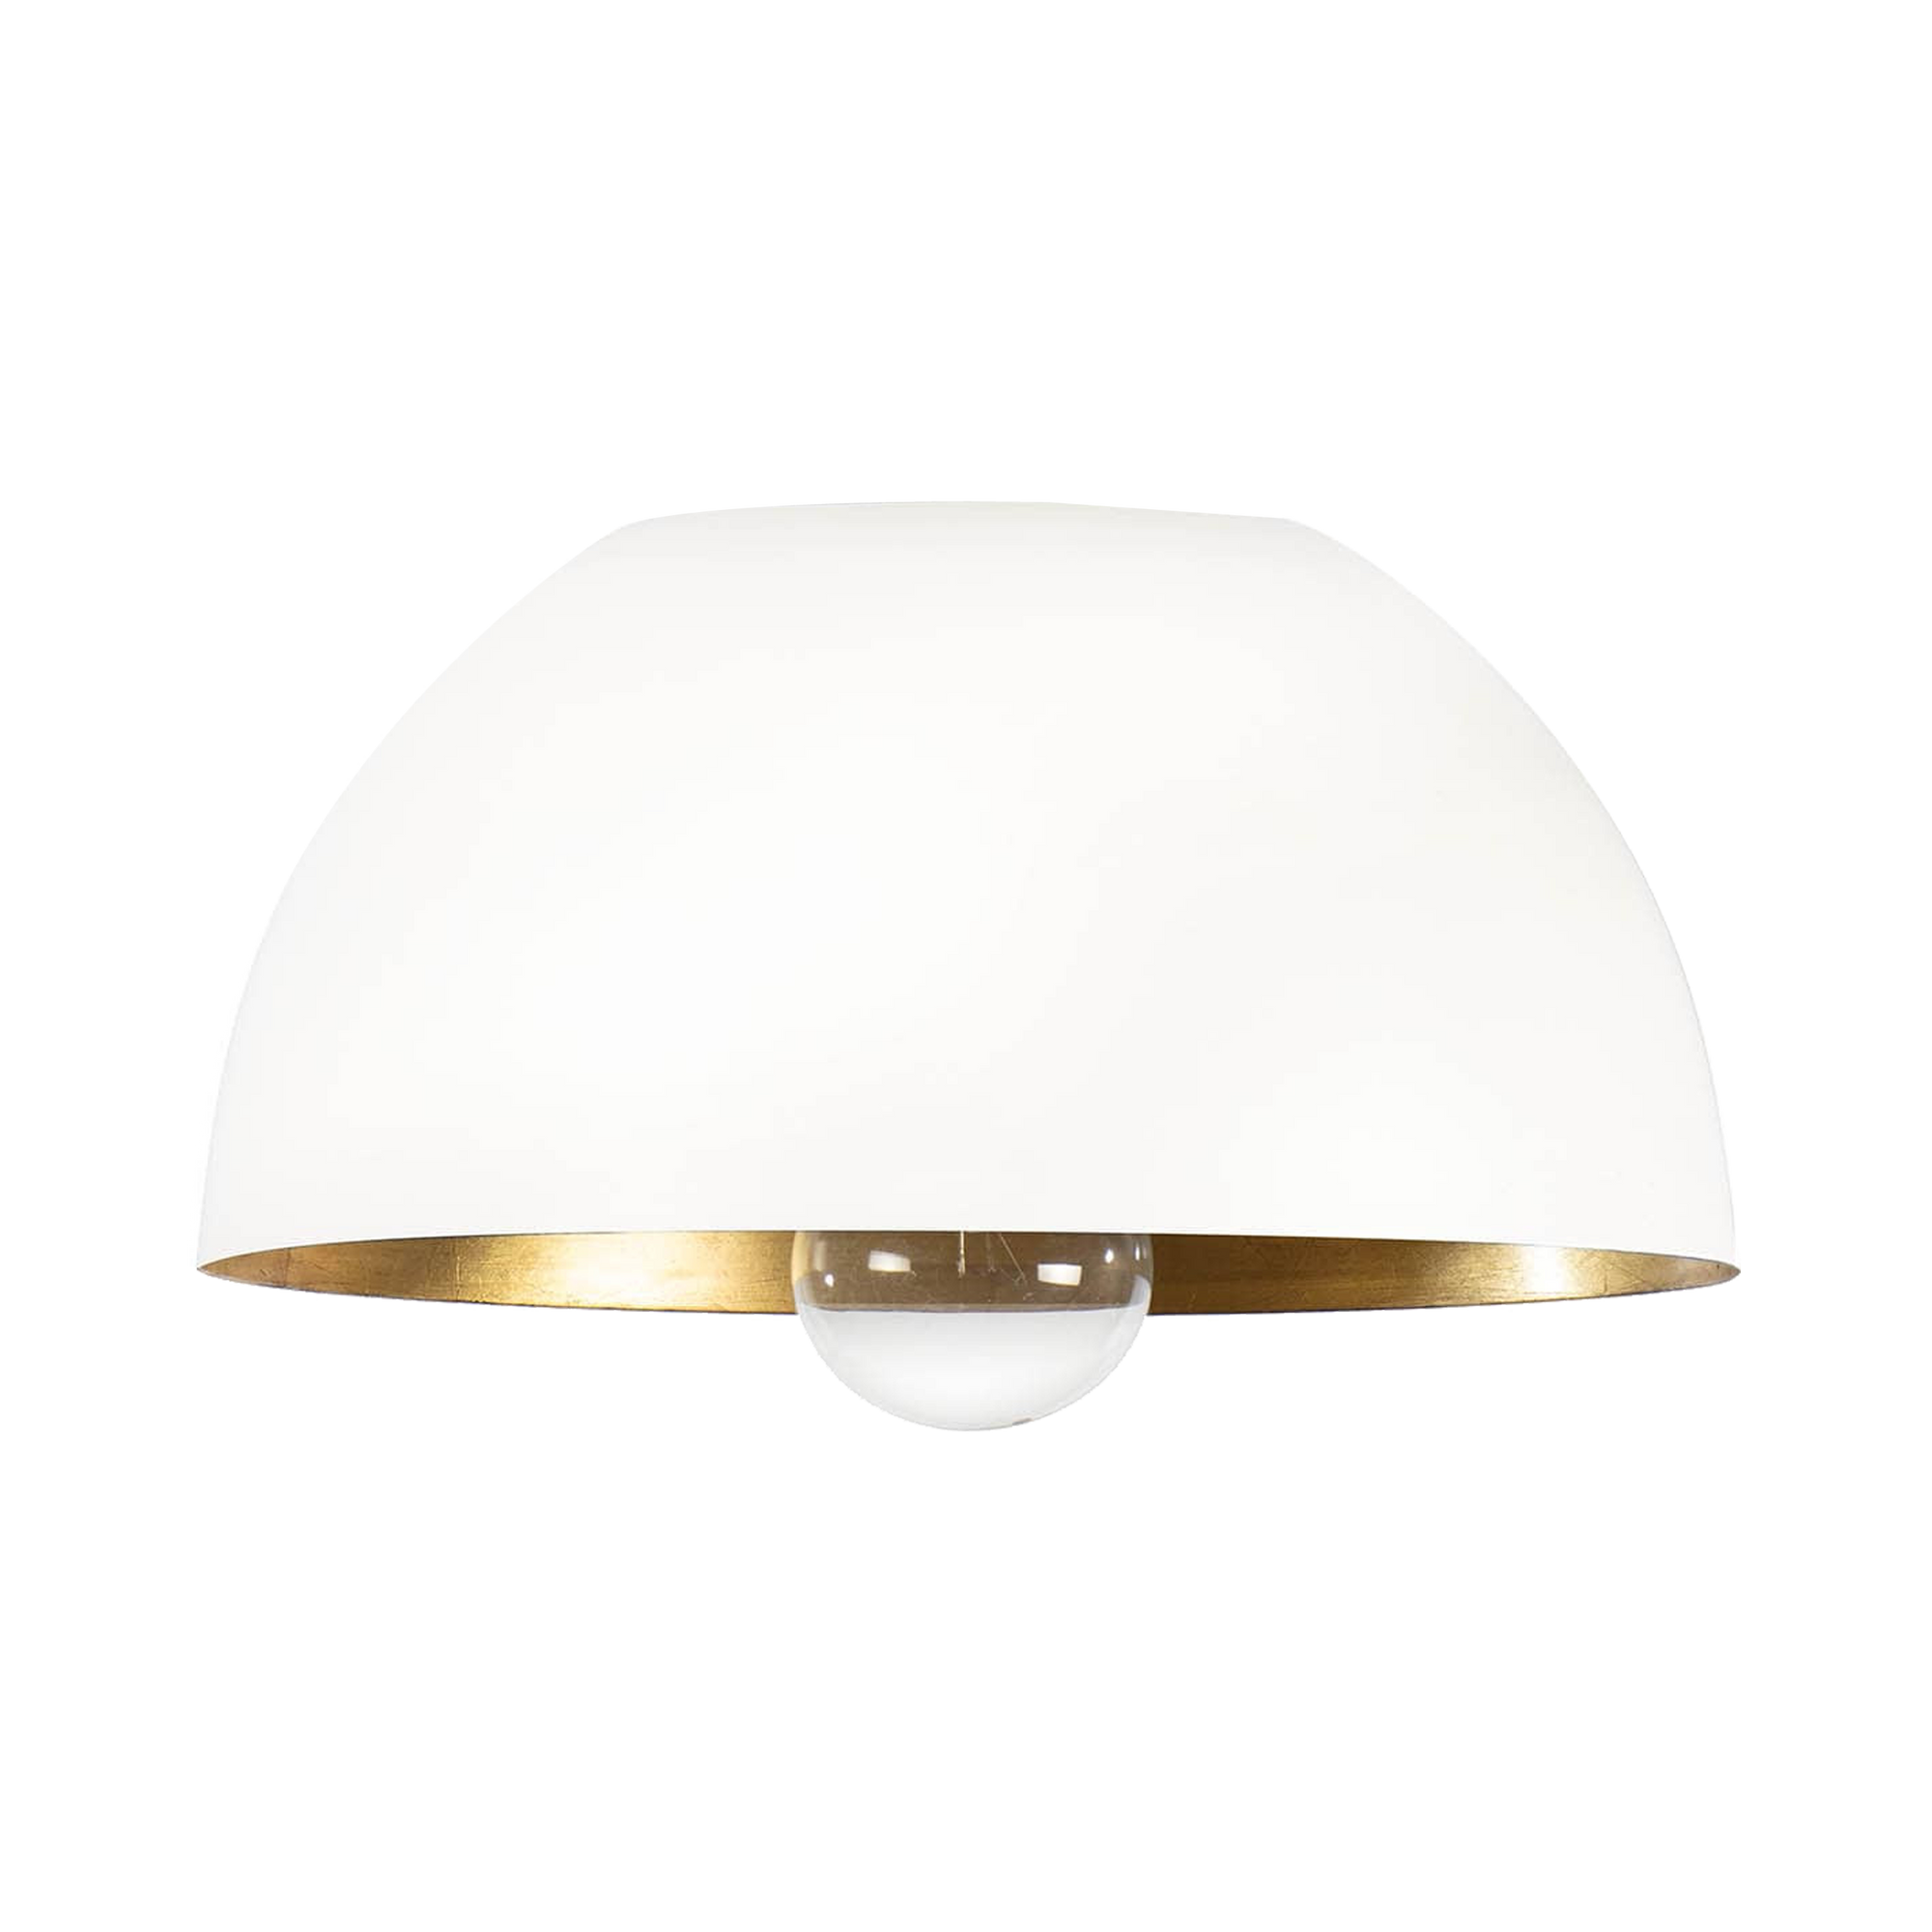 This flush mount light features a simple domed shade brings sleek minimalistic appeal.